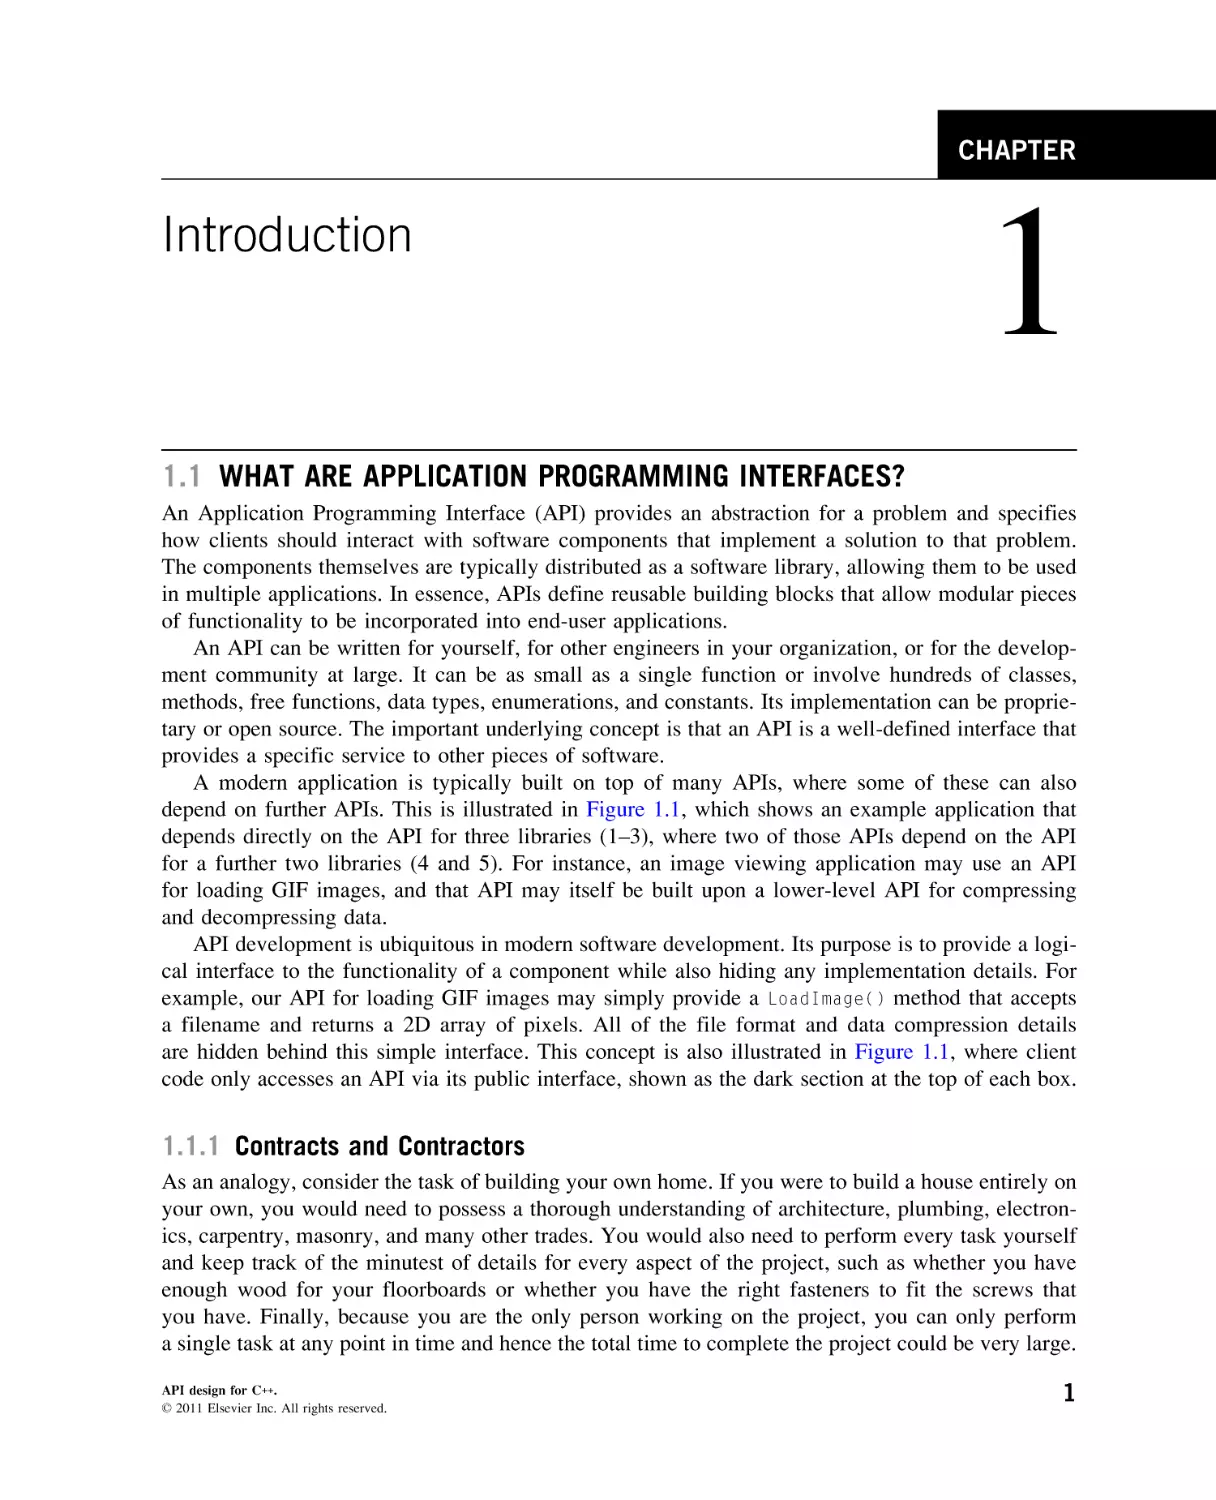 Introduction
What are Application Programming Interfaces?
Contracts and Contractors